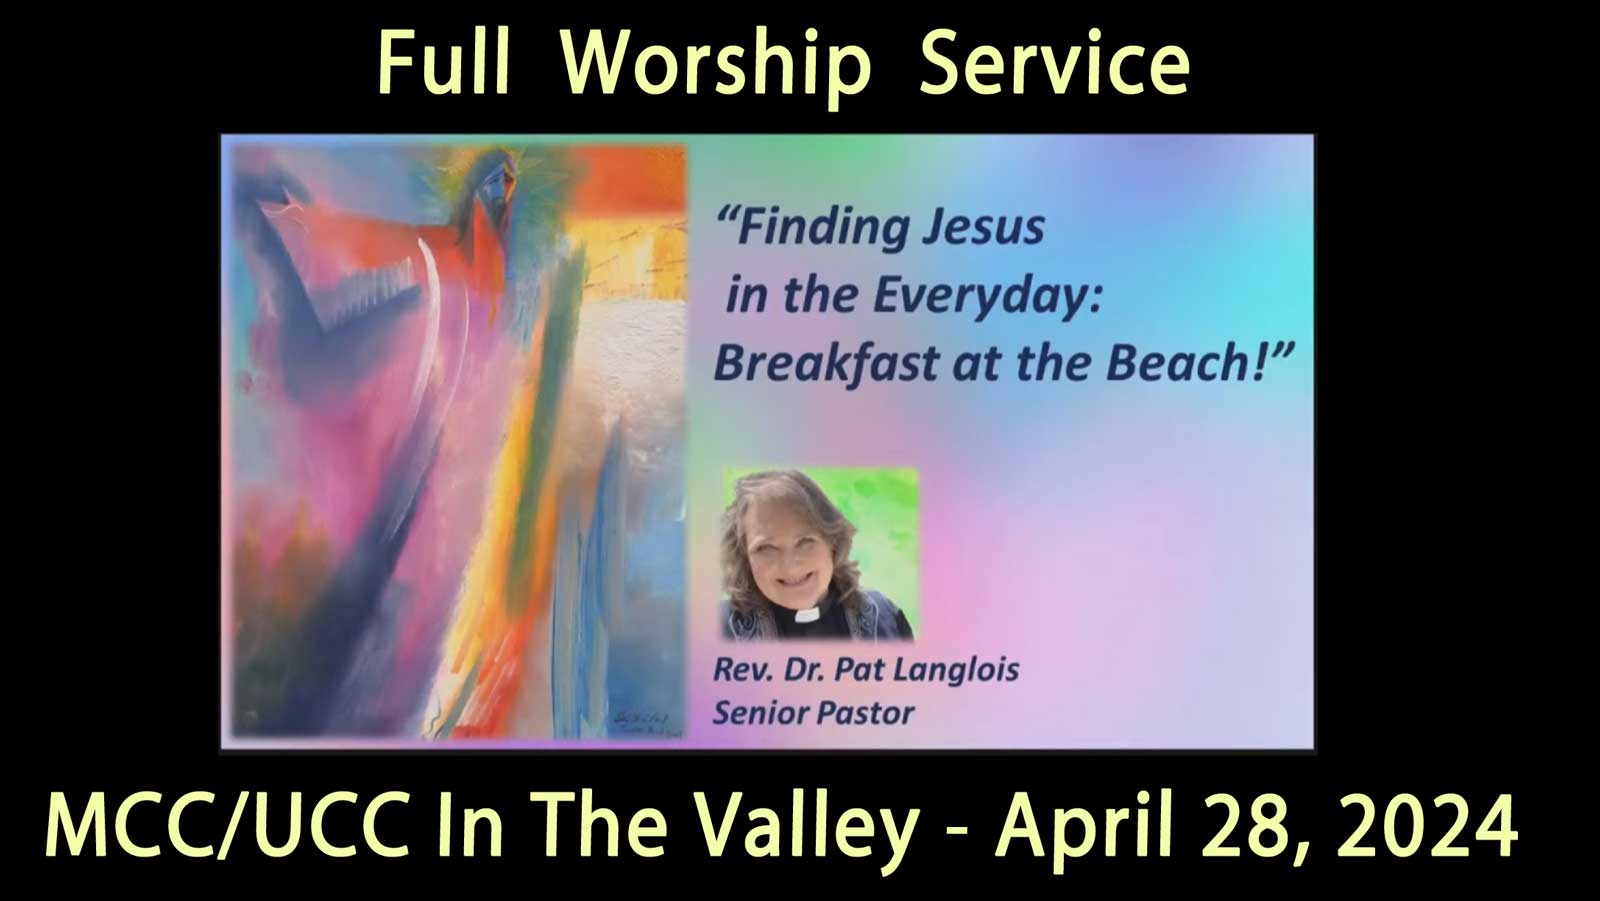 April 28, 2024 MCC UCC in the Valley Service - Finding Jesus in the Everyday Breakfast at the Beach